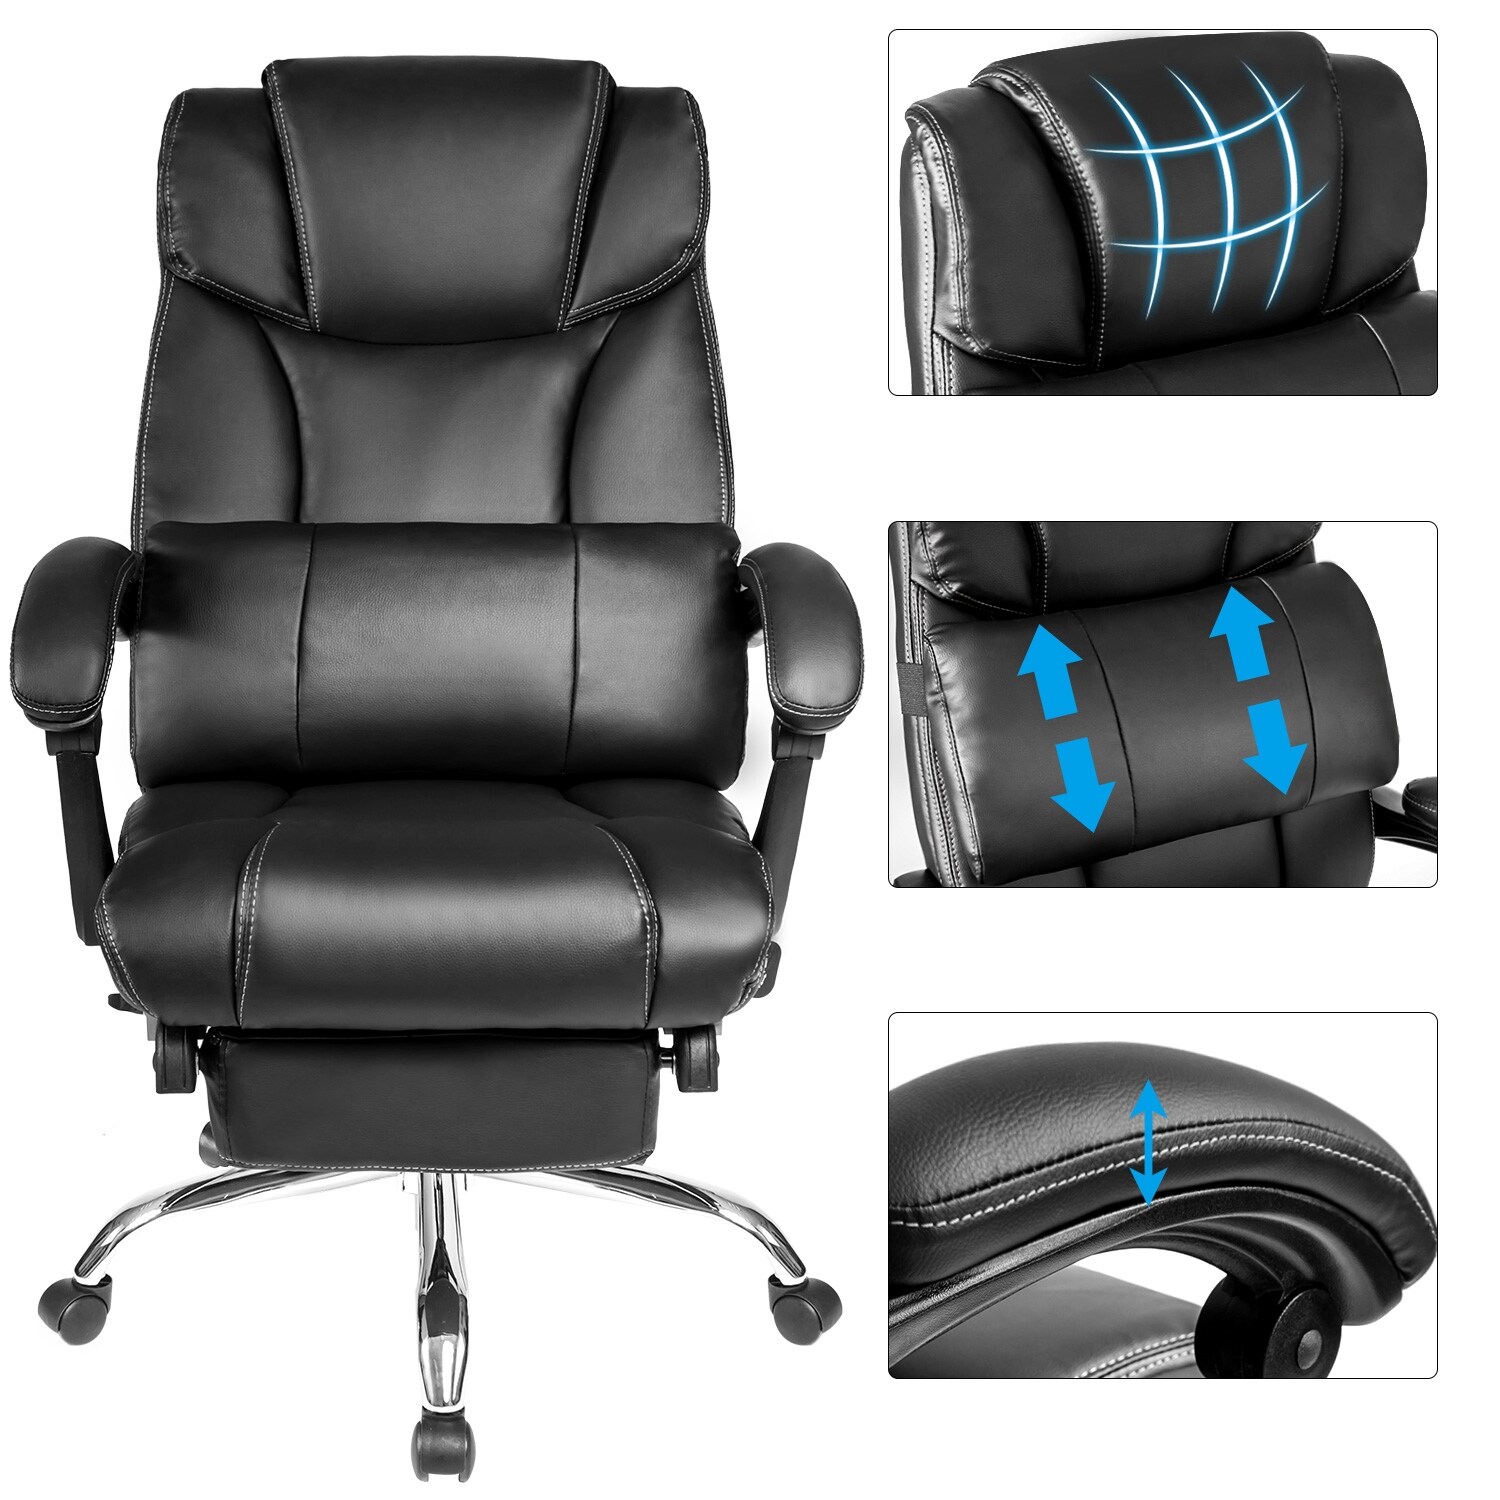 https://ak1.ostkcdn.com/images/products/is/images/direct/4708f933d1cf53703eff78d8971d6919288b2966/EYIW-Adjustable-Height-Double-Padded-Office-Chair-%2C-Adjustable-Back-Swivel-Arm-Desk-Chair-with-Support-Cushion-and-Footrest.jpg